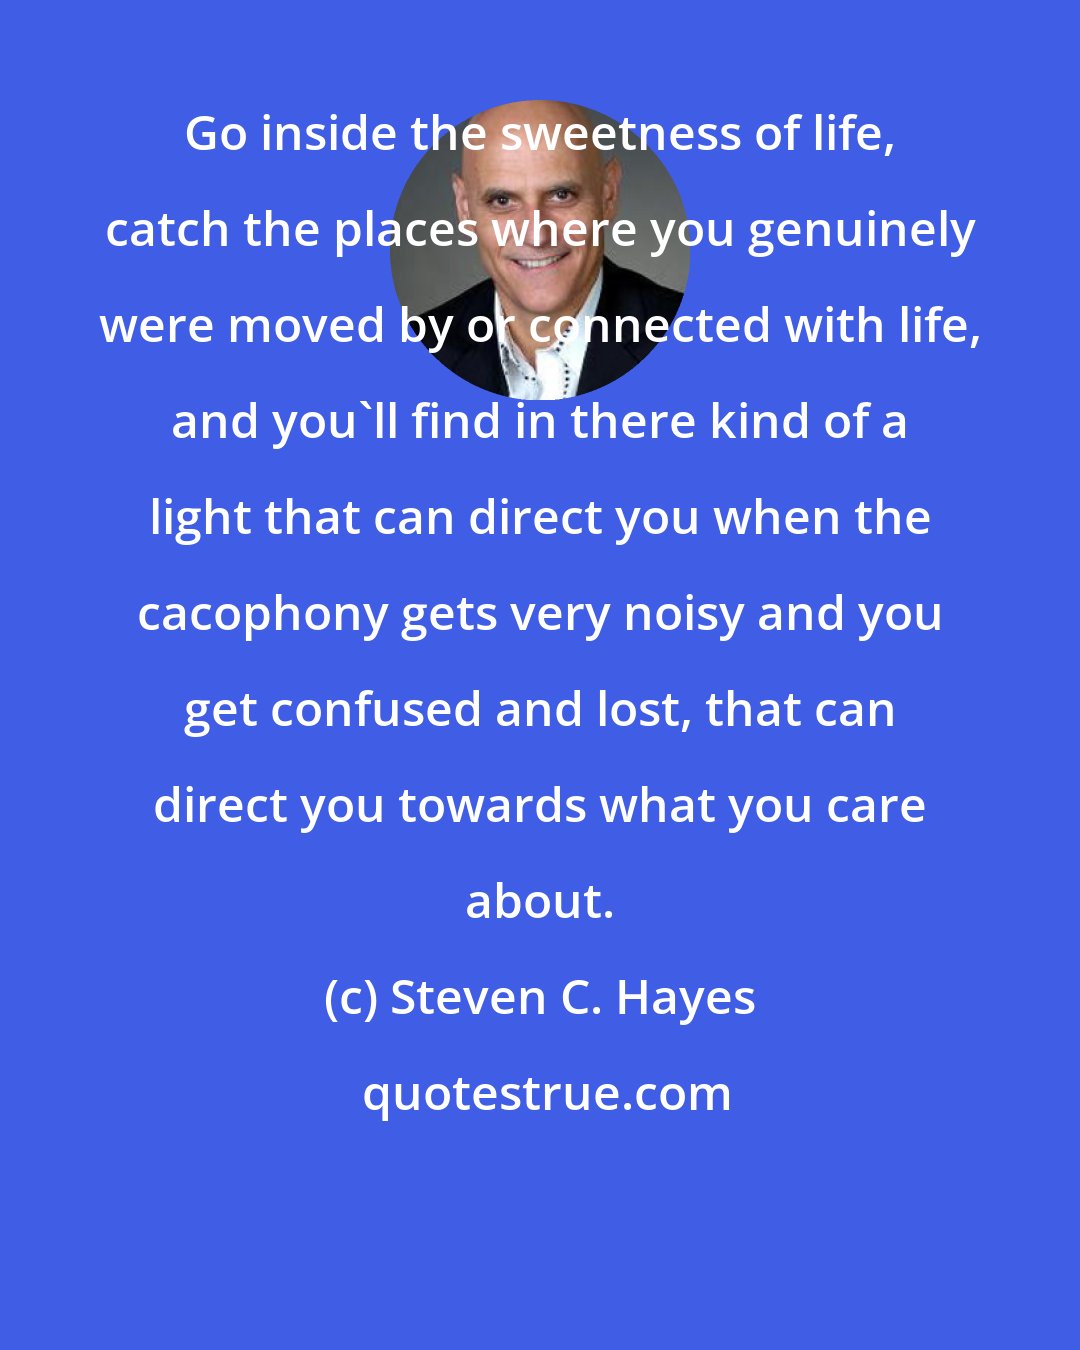 Steven C. Hayes: Go inside the sweetness of life, catch the places where you genuinely were moved by or connected with life, and you'll find in there kind of a light that can direct you when the cacophony gets very noisy and you get confused and lost, that can direct you towards what you care about.